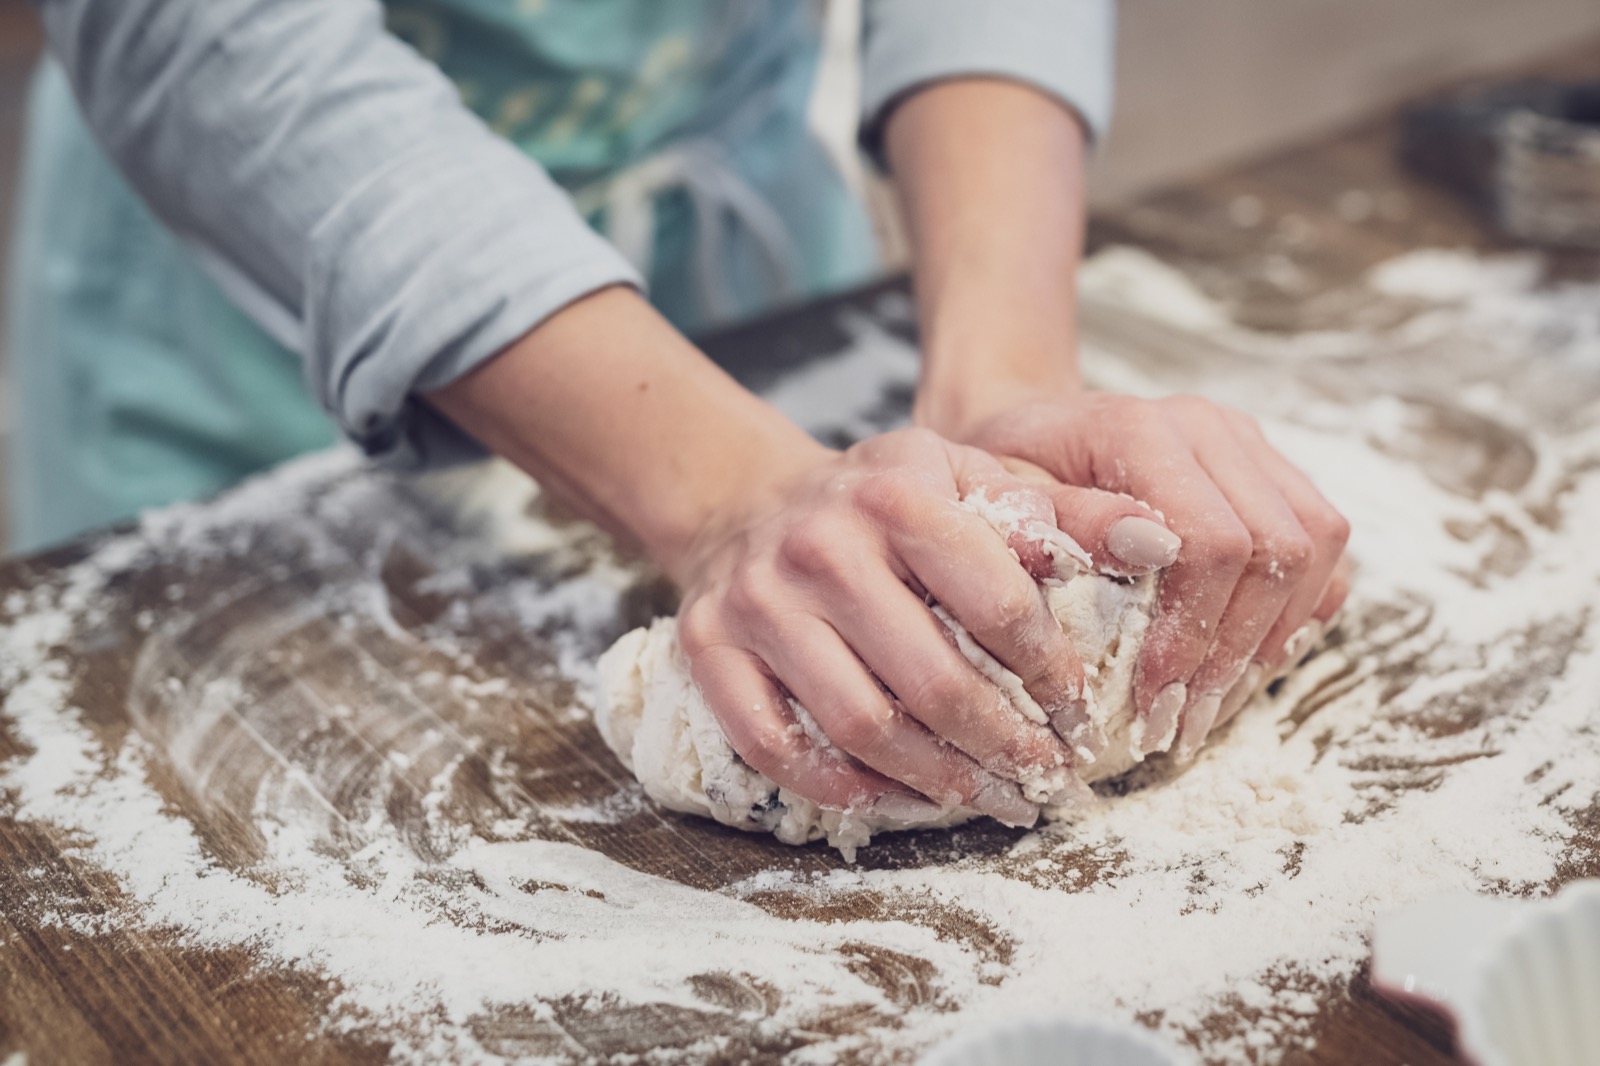 We Know How Relaxed You Are Based on the Self-Care Activities You’ve Done Recently Bread making baking dough